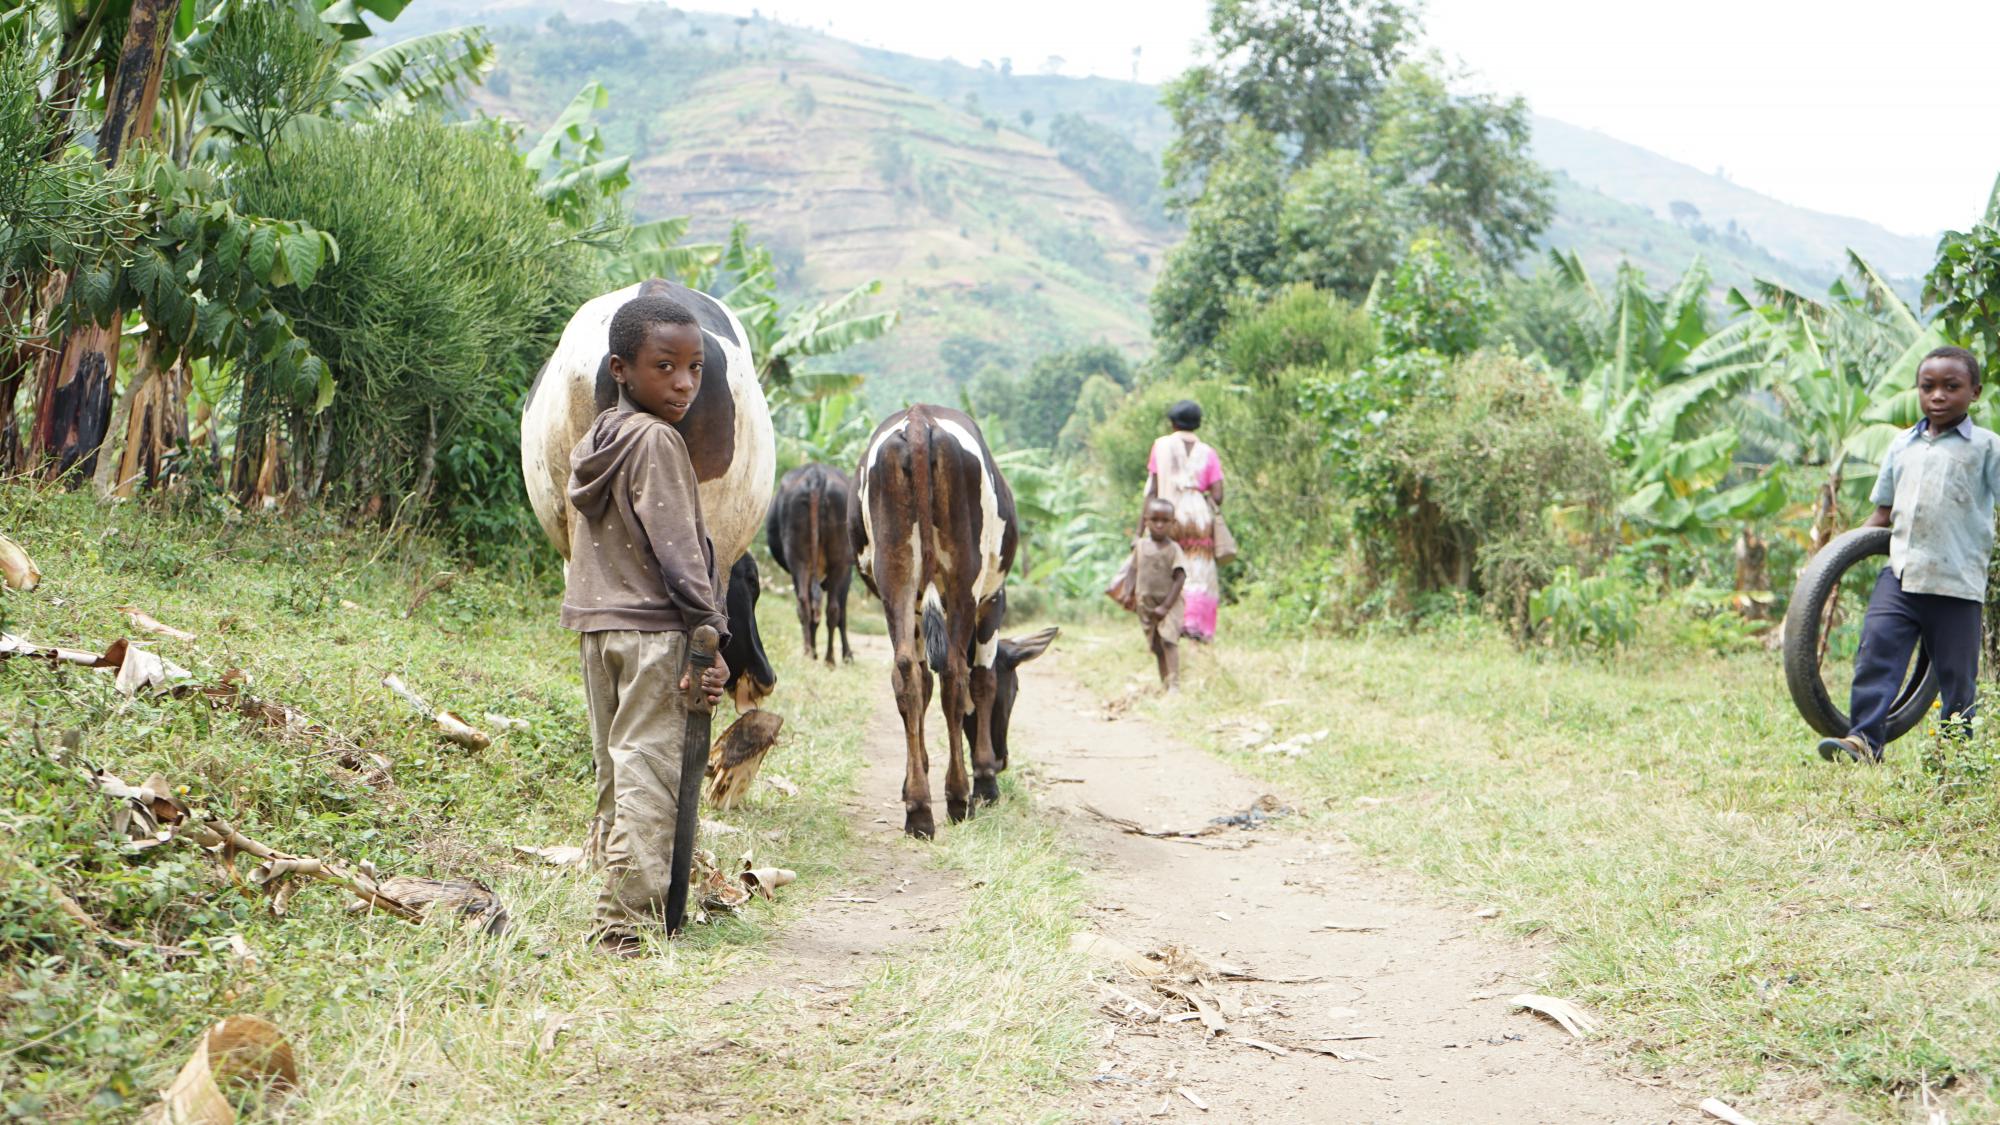 Photo 4: Boys are taking care about cows, village closed to the mountains, Uganda March 2022